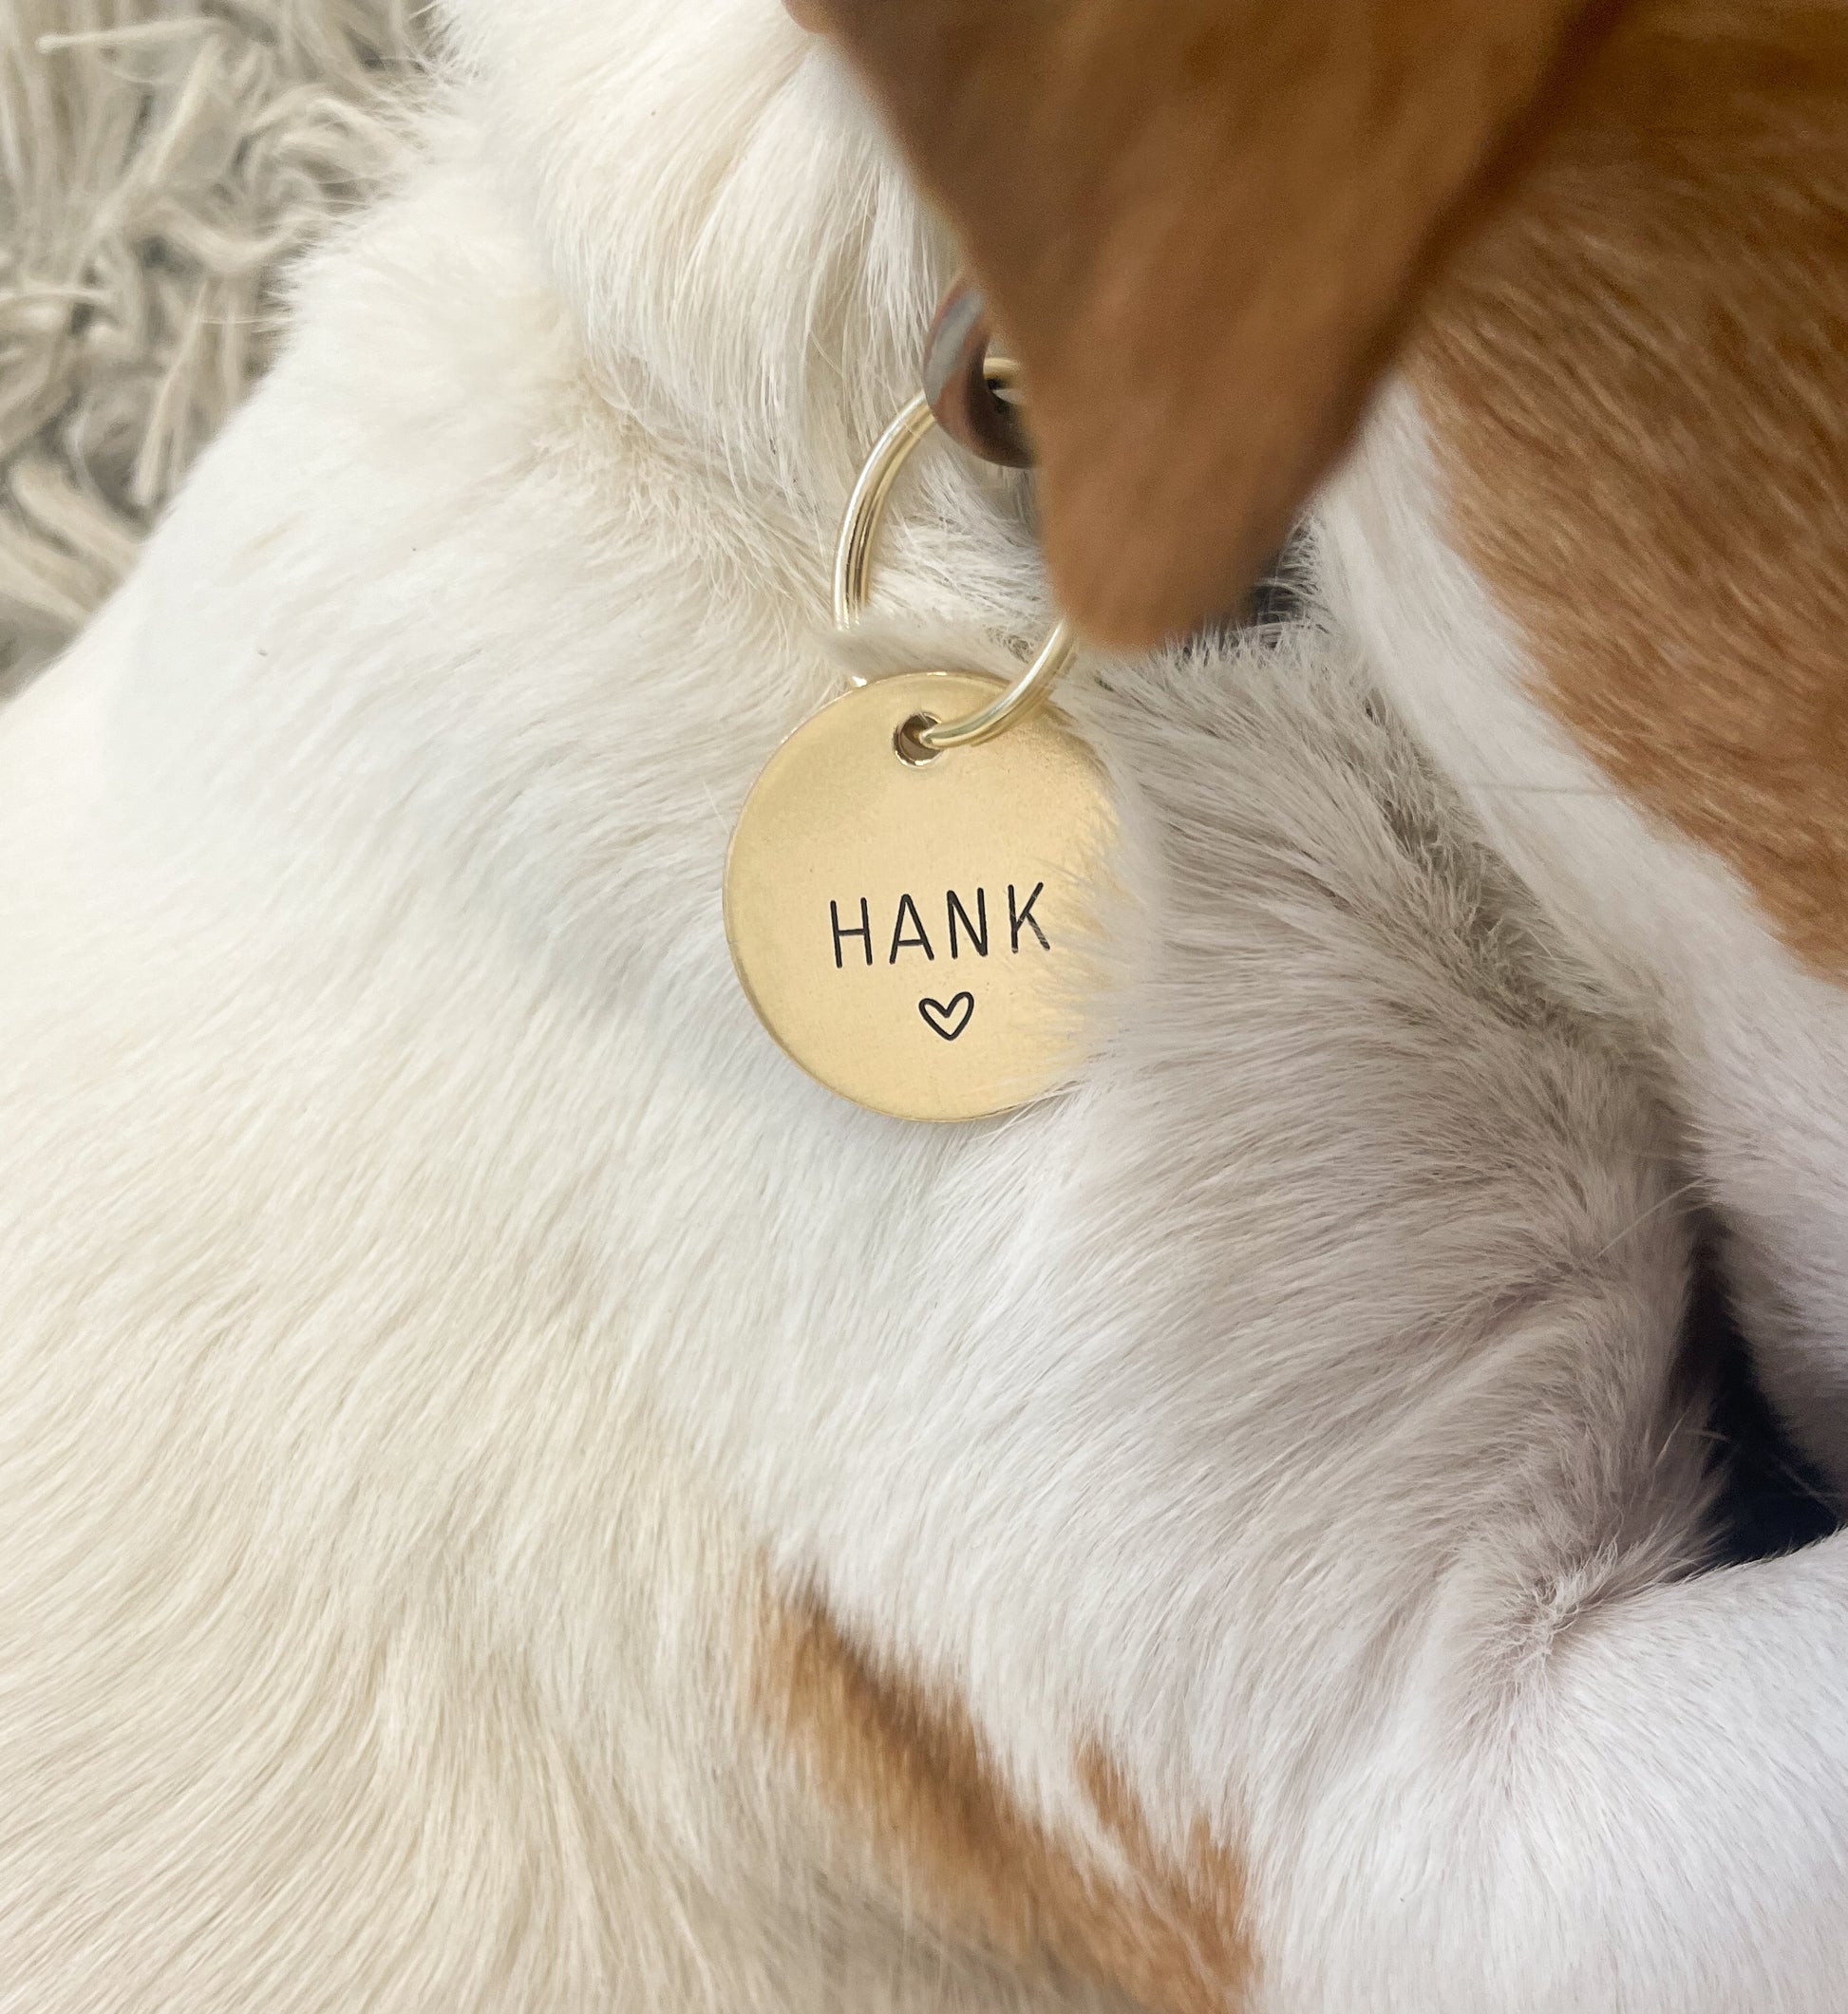 Personalized Dog Tag - Heart Design Engraved Dog Tag - Cat ID Tag - Dog Collar Tag - Custom Dog Tag - Pet ID Tag - Pet Name Tag - Love Dog Tag - Heart Dog Tag - Dog Gear - Dog Accessories - Pet Accessories